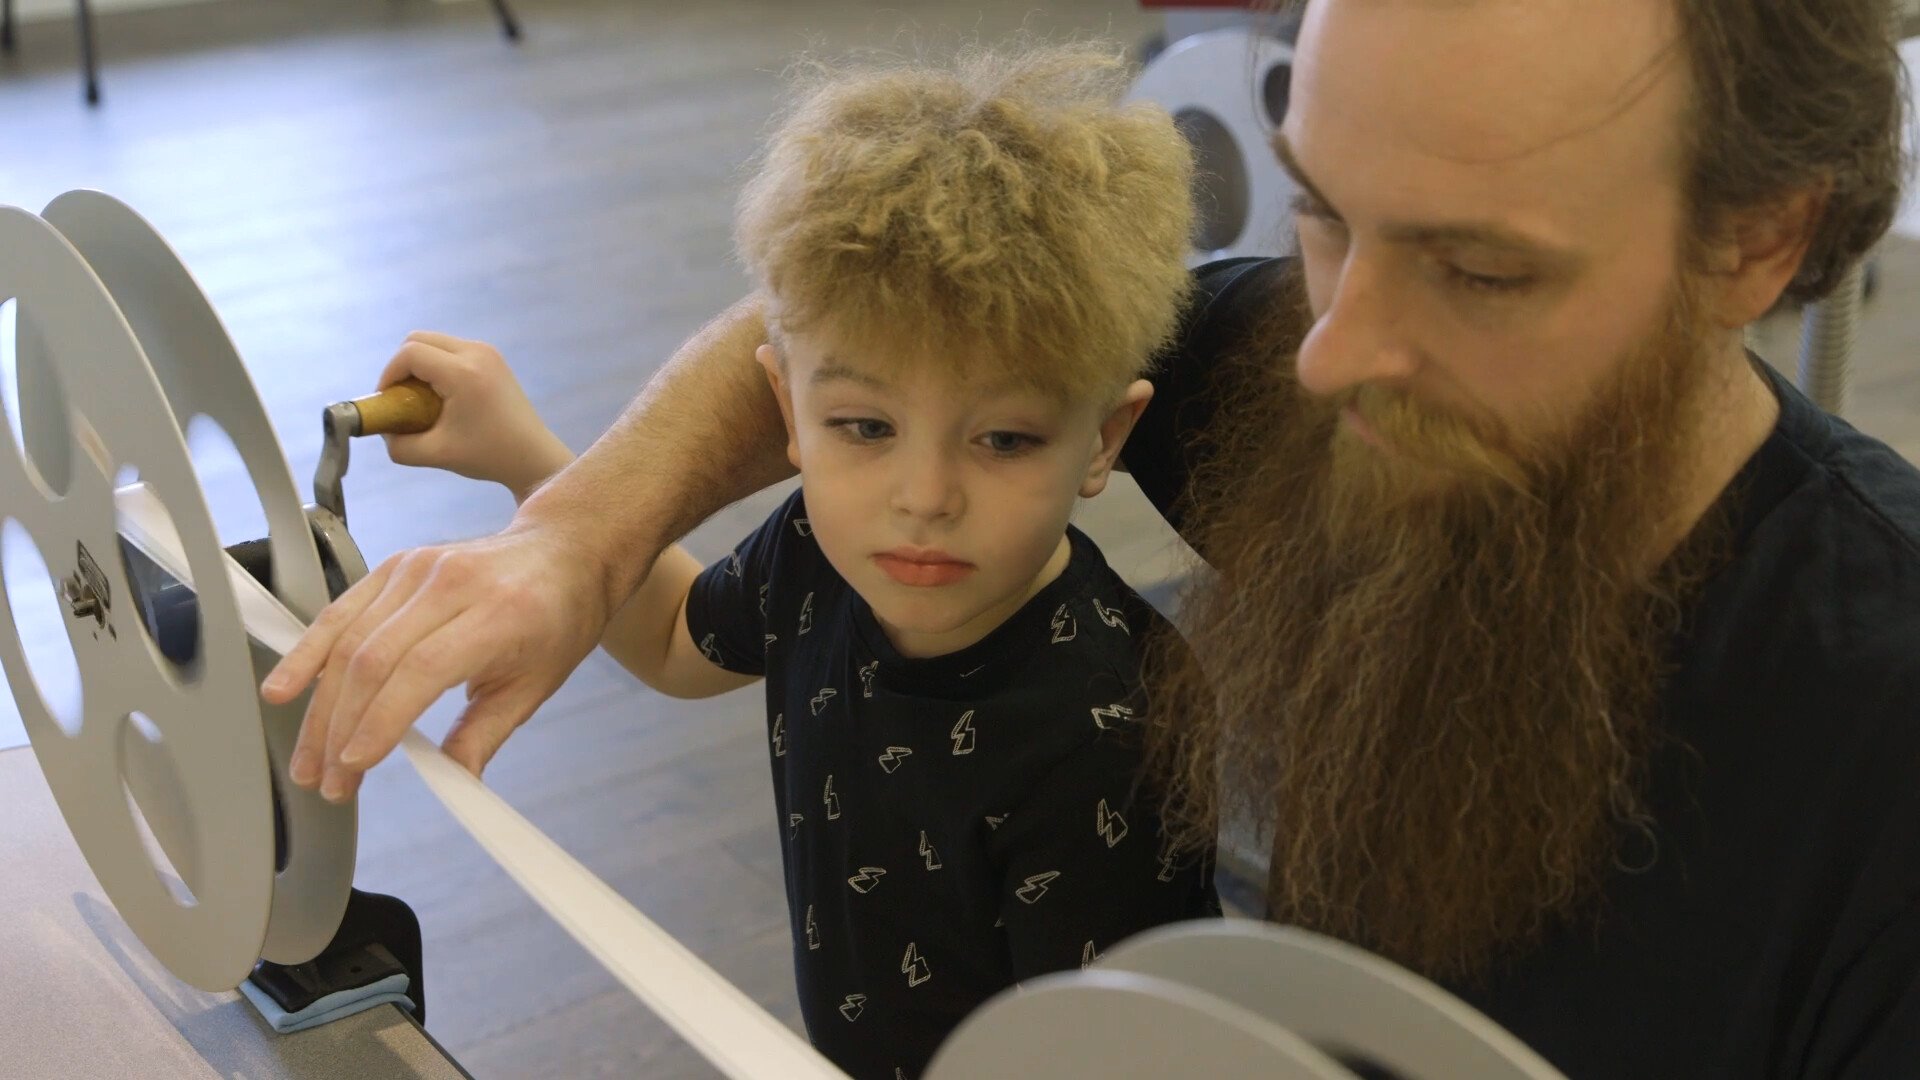 child winds a film reel under instruction of a man with a beard